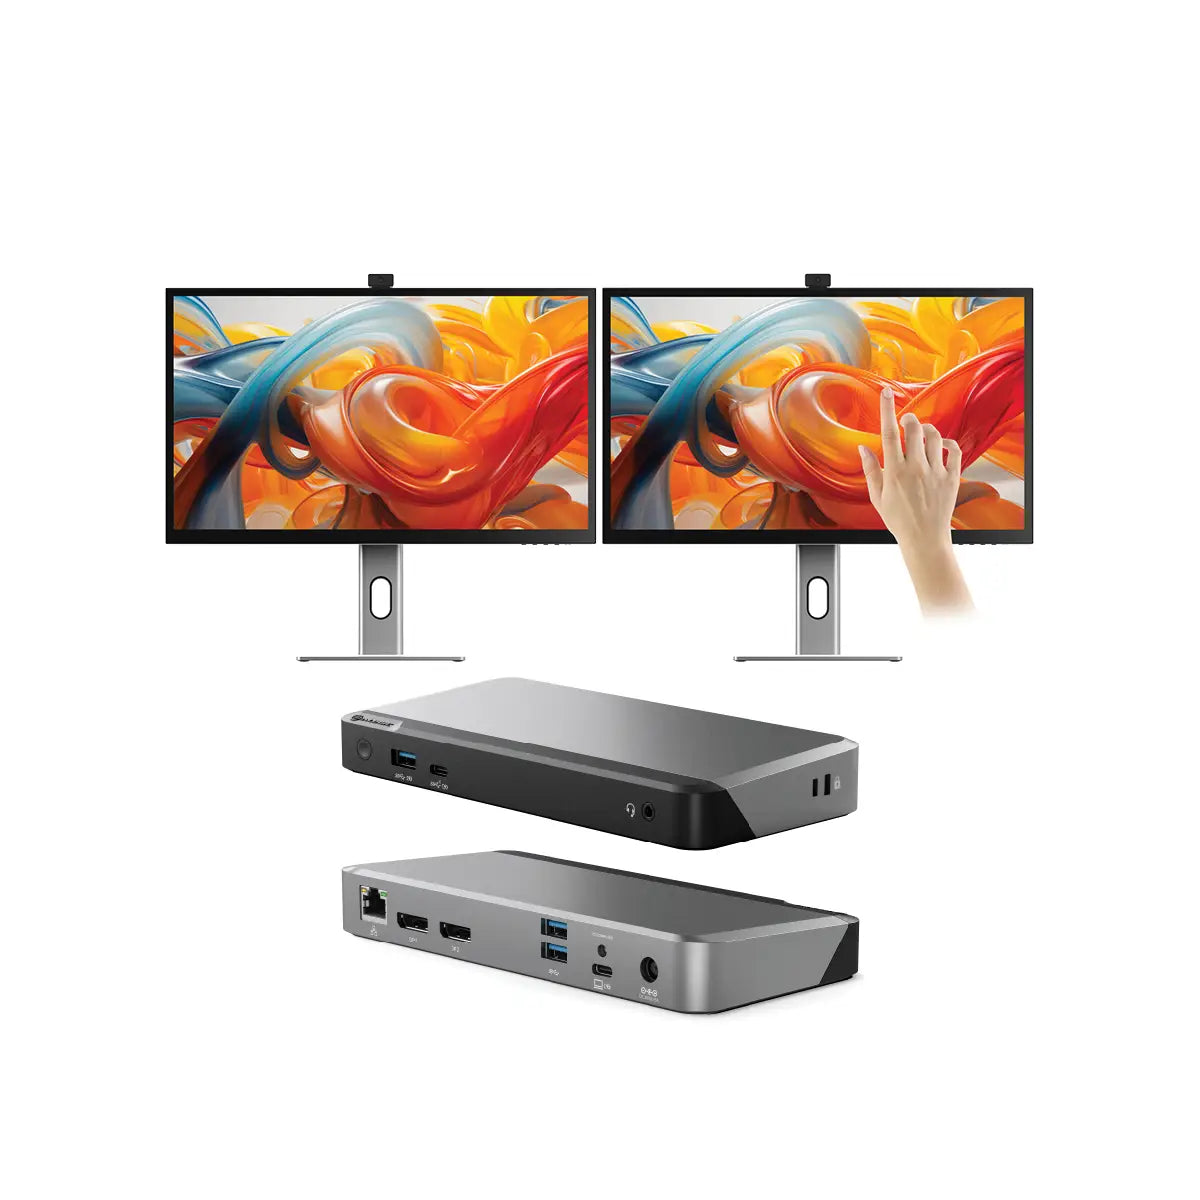 clarity-pro-touch-27-uhd-4k-monitor-with-65w-pd-webcam-and-touchscreen-pack-of-2-dx2-dual-4k-display-universal-docking-station-with-65w-power-delivery_1